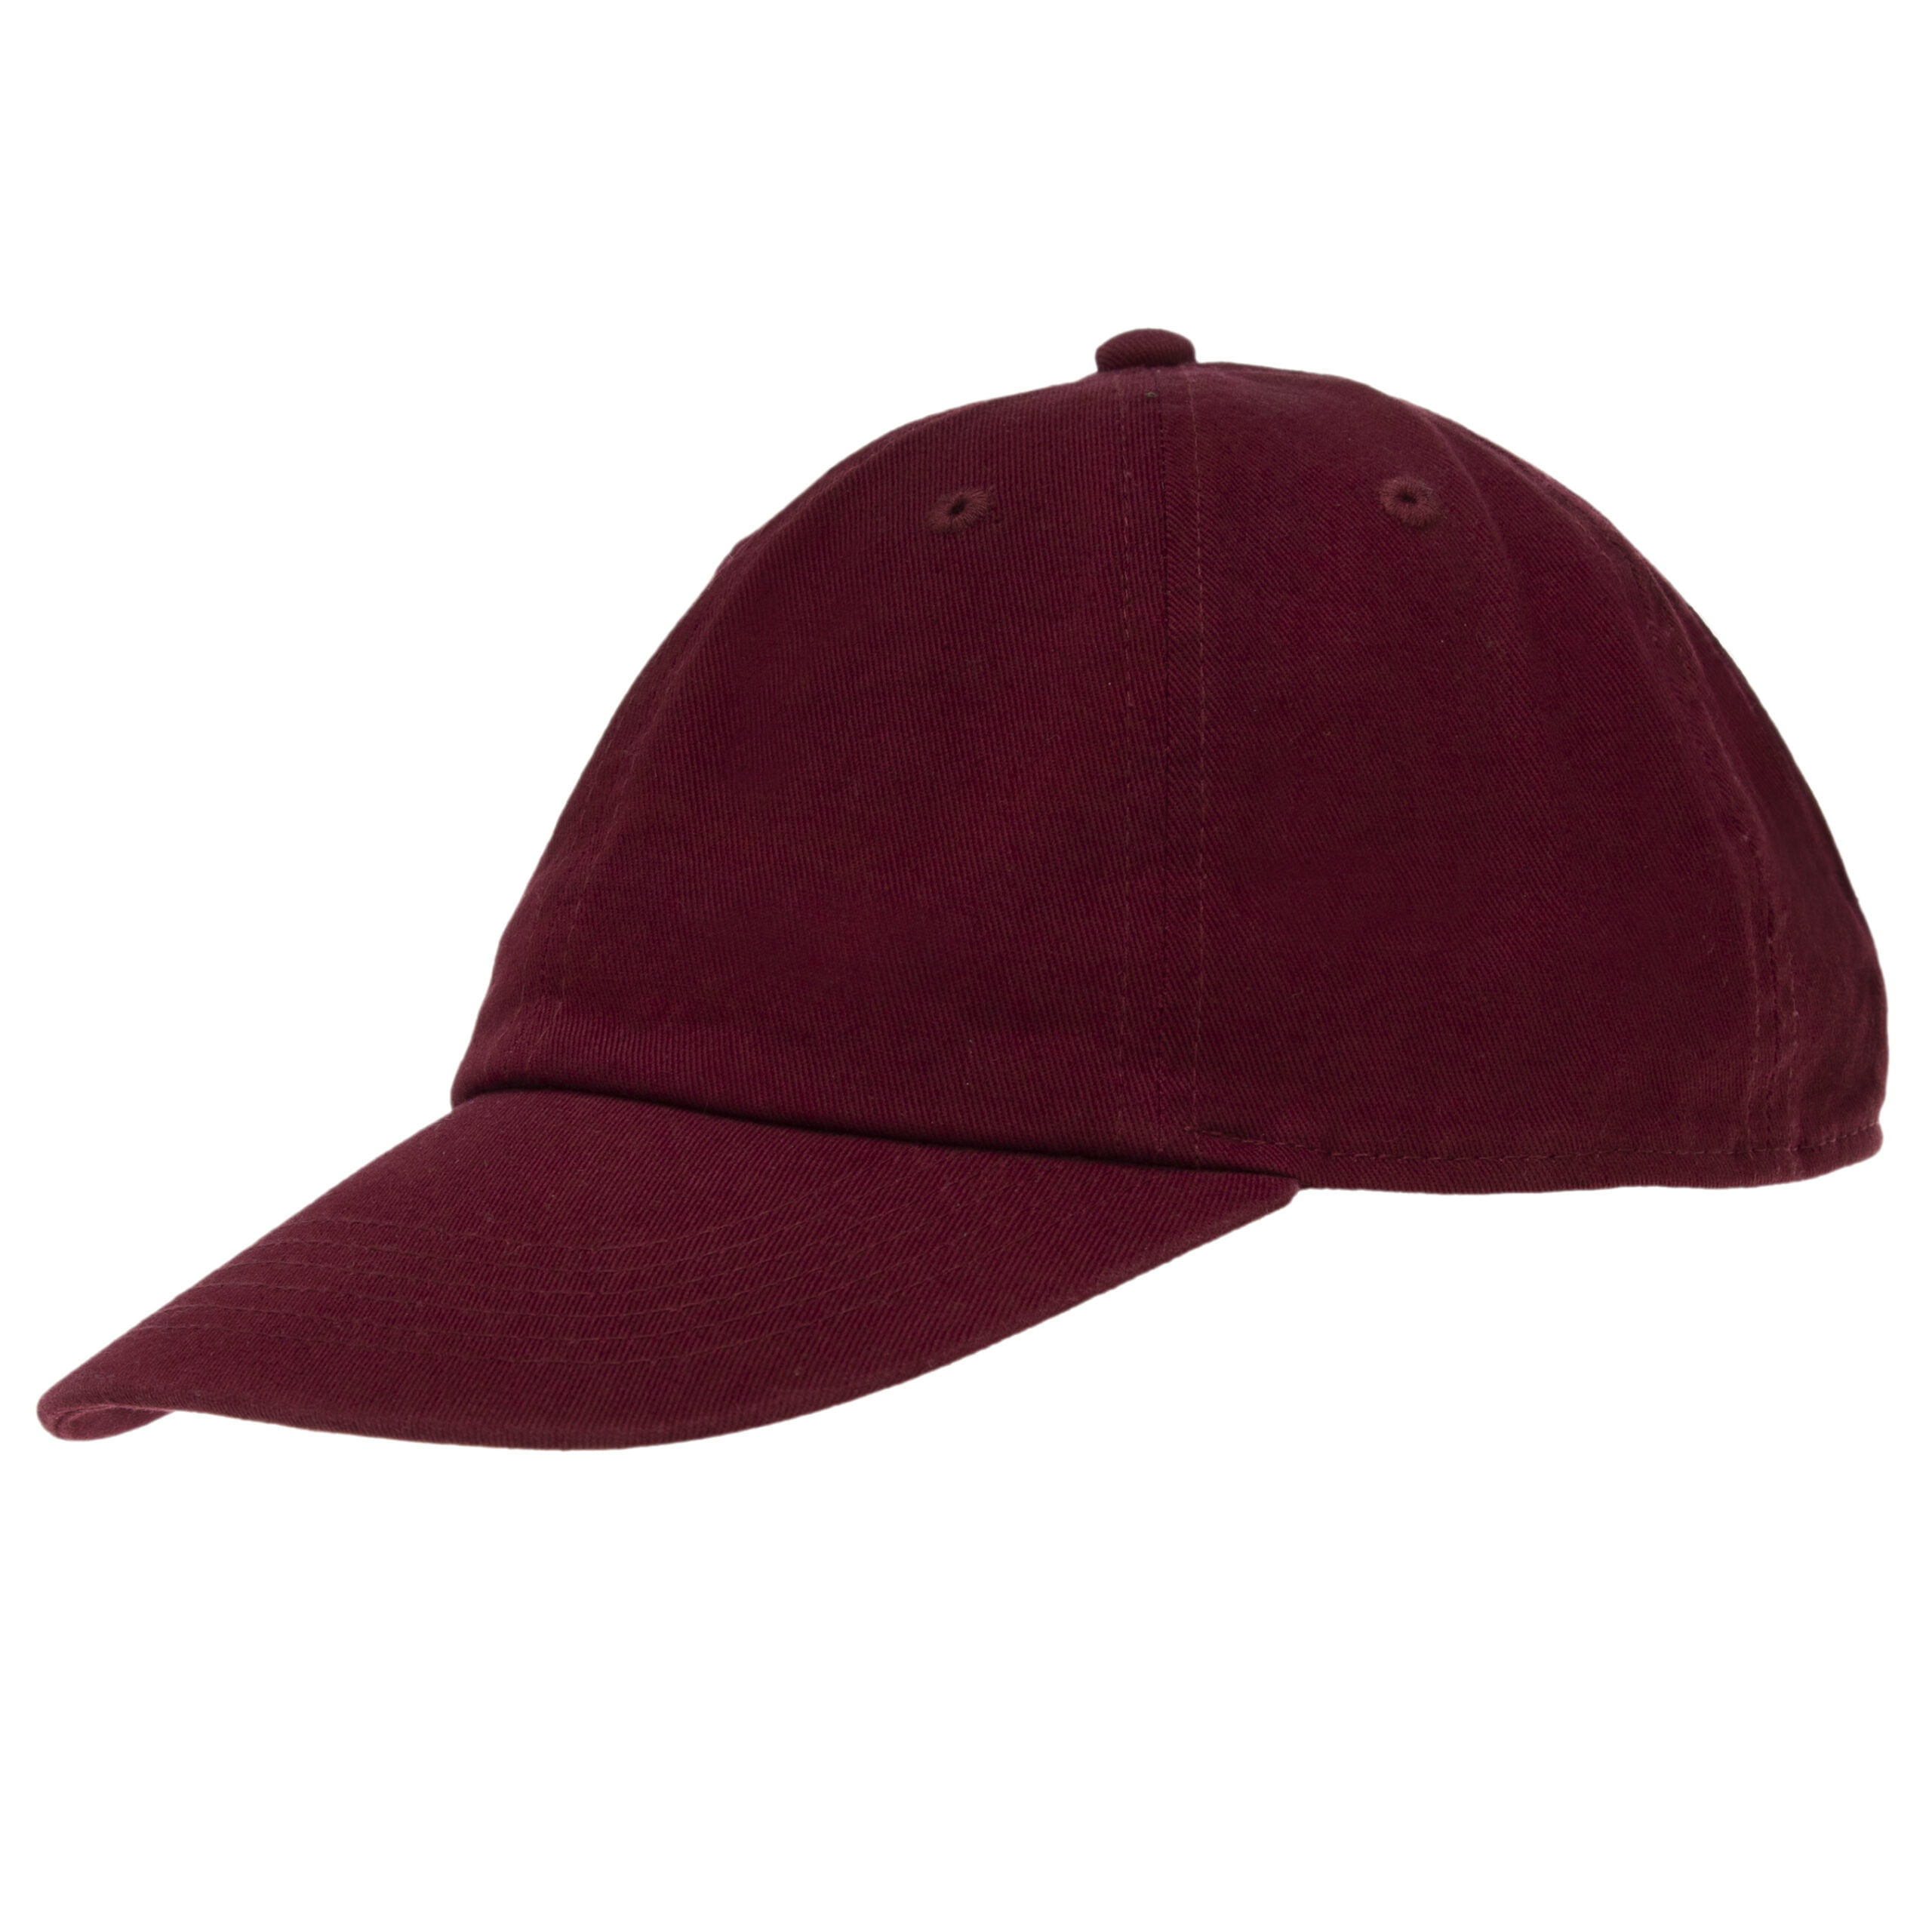 1pc Wine Baseball Cotton Cap - Dad Hat - Low Profile - Stone Washed